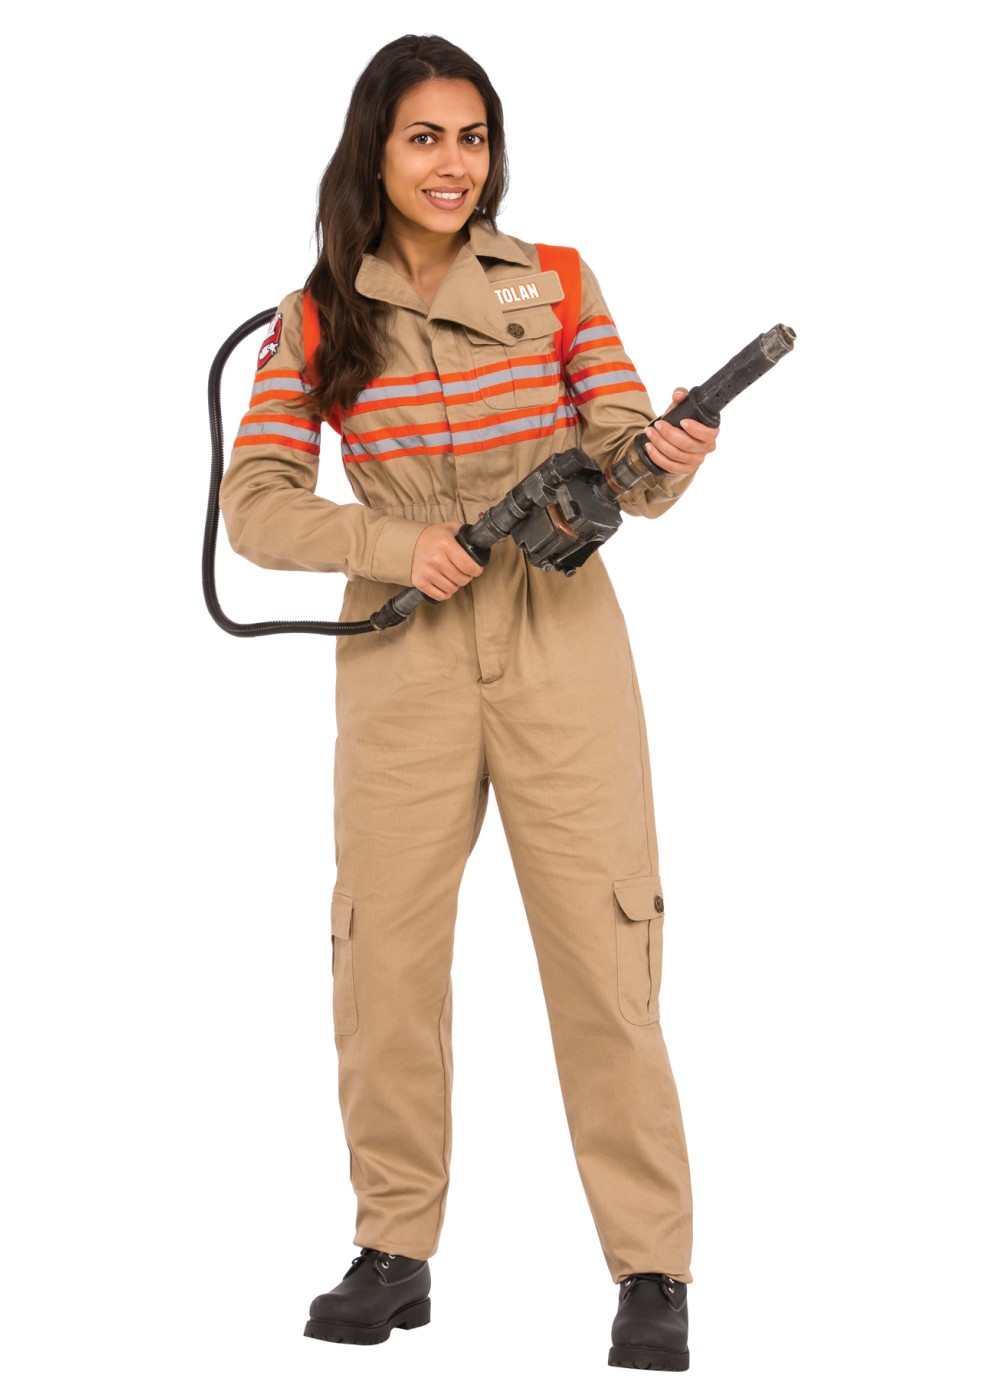 Ghostbusters Woman Theatrical Movie Costume